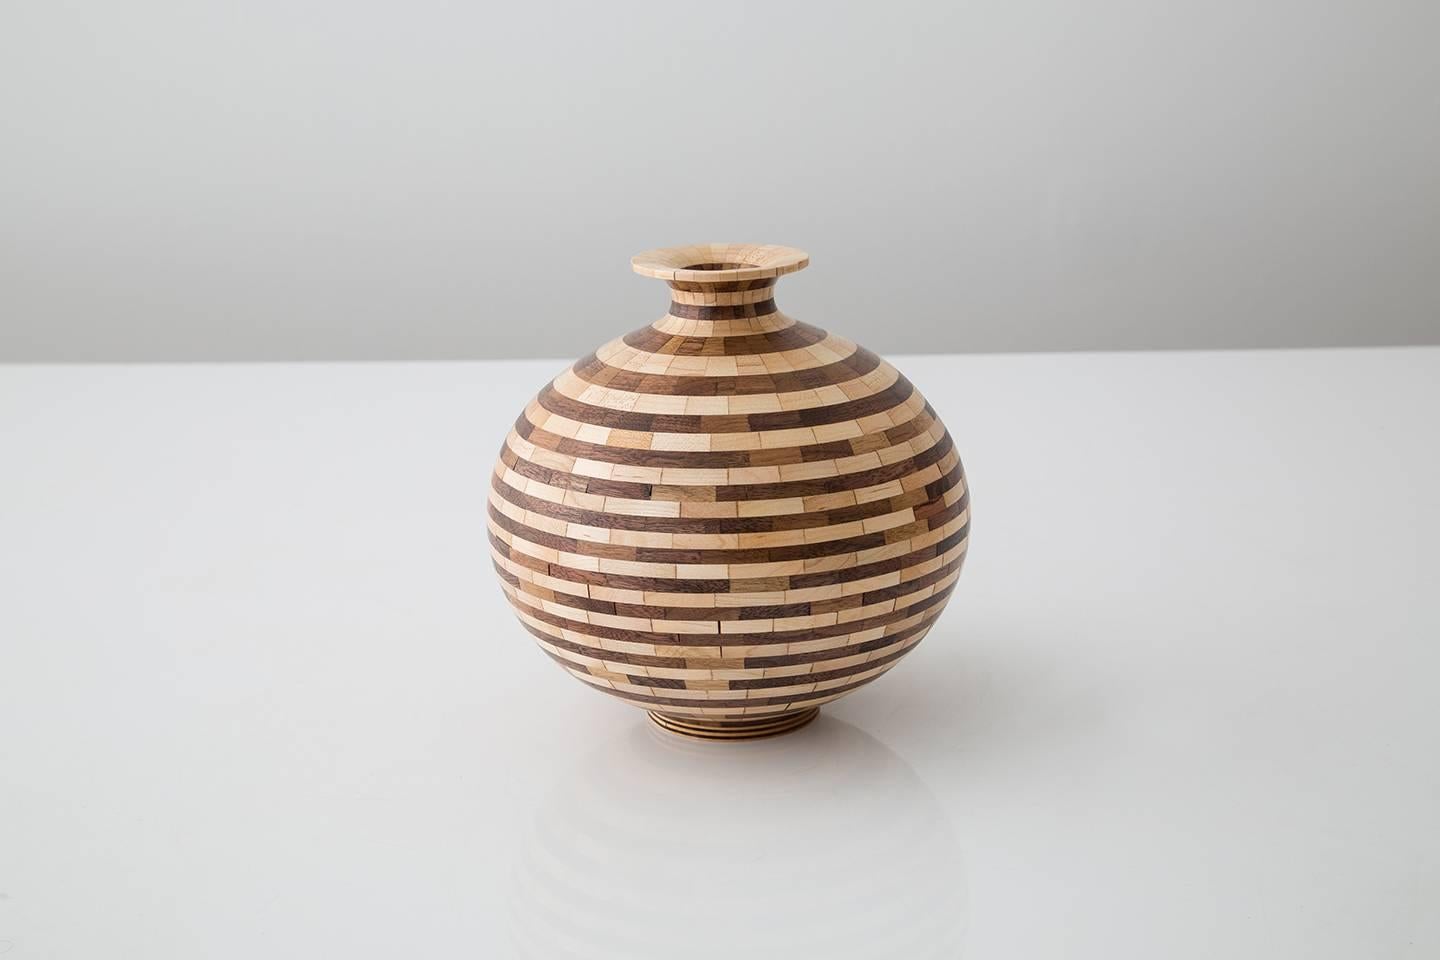 Part of Richard Haining's Stacked Collection, this round vase form was made using reclaimed walnut and maple, sourced and salvaged from a variety of local Brooklyn wood shops. The walnut and maple's contrasting natural colors shows off tones ranging